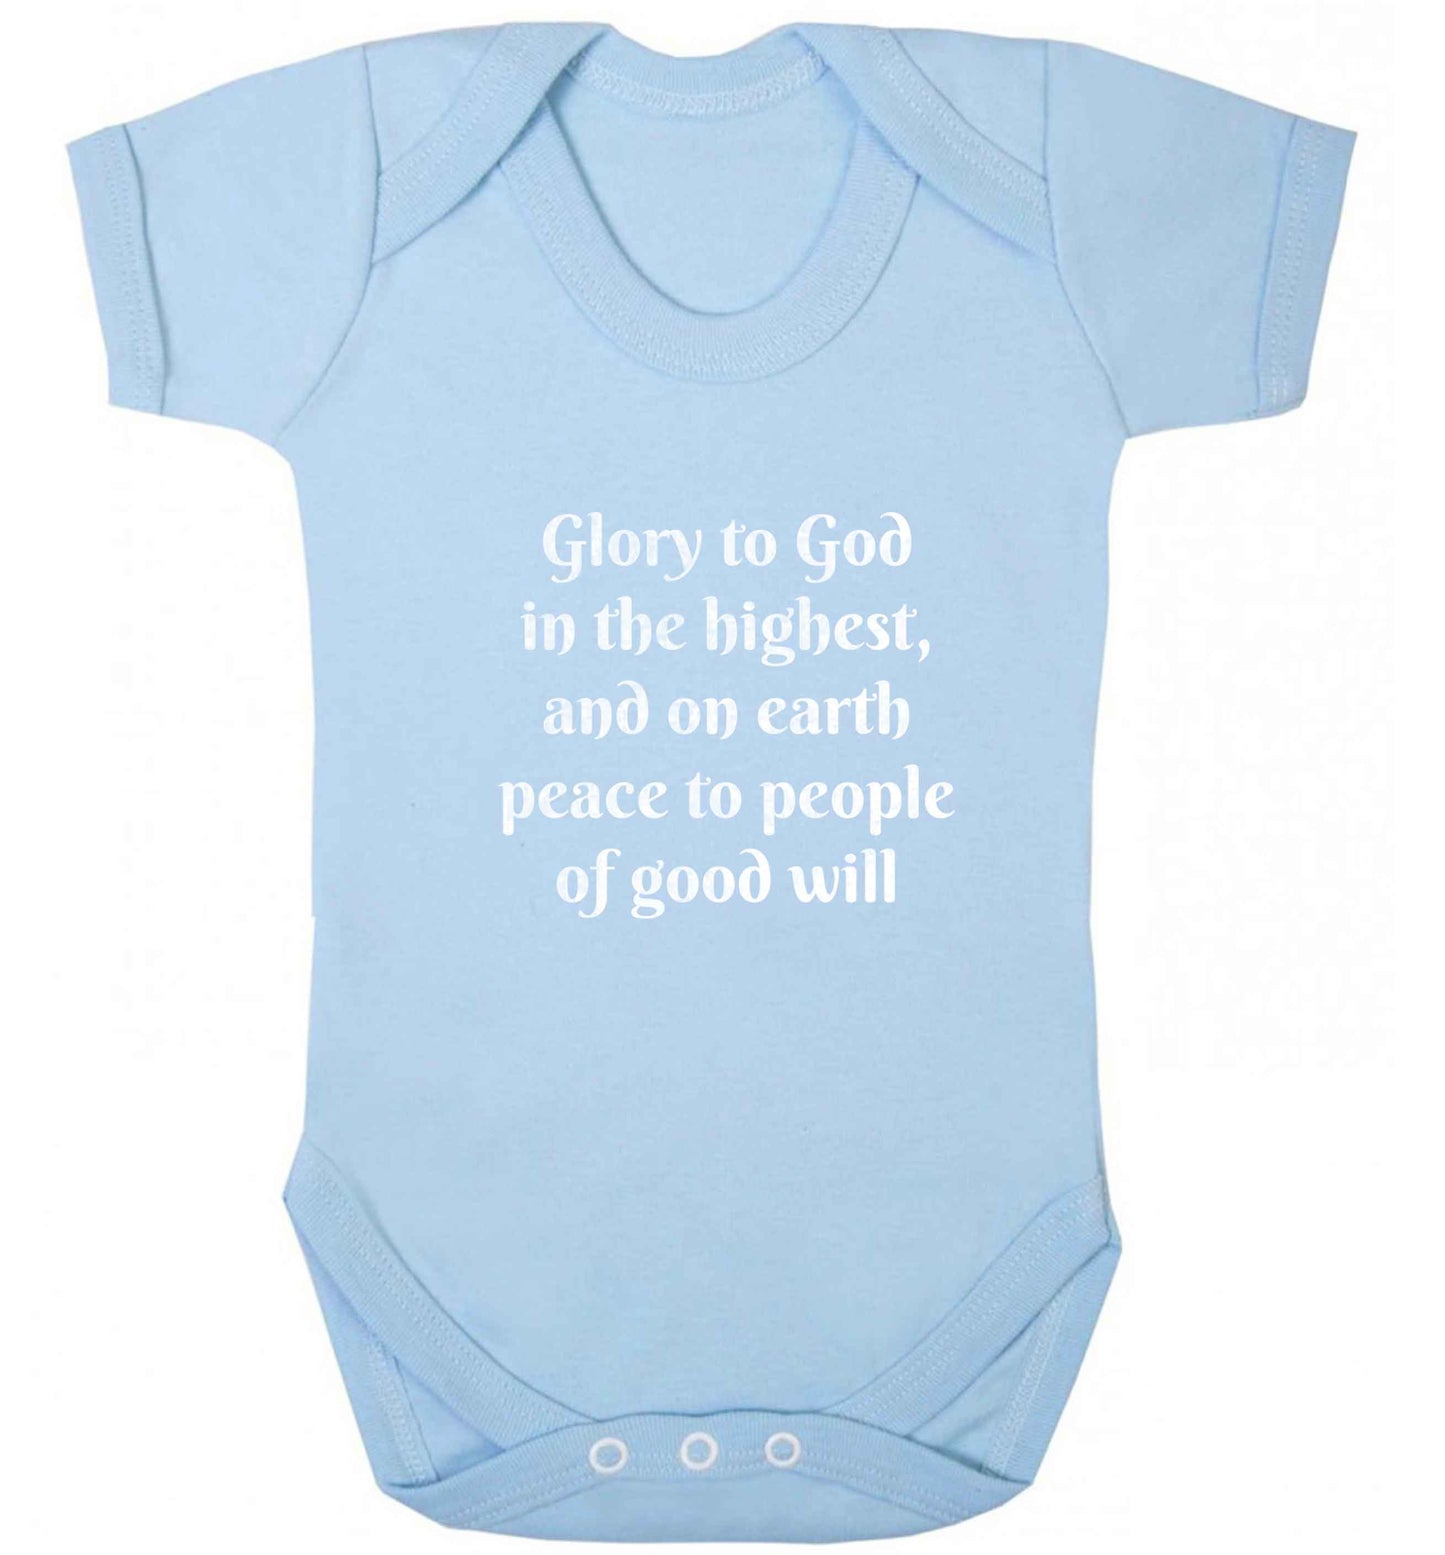 Glory to God in the highest, and on earth peace to people of good will baby vest pale blue 18-24 months